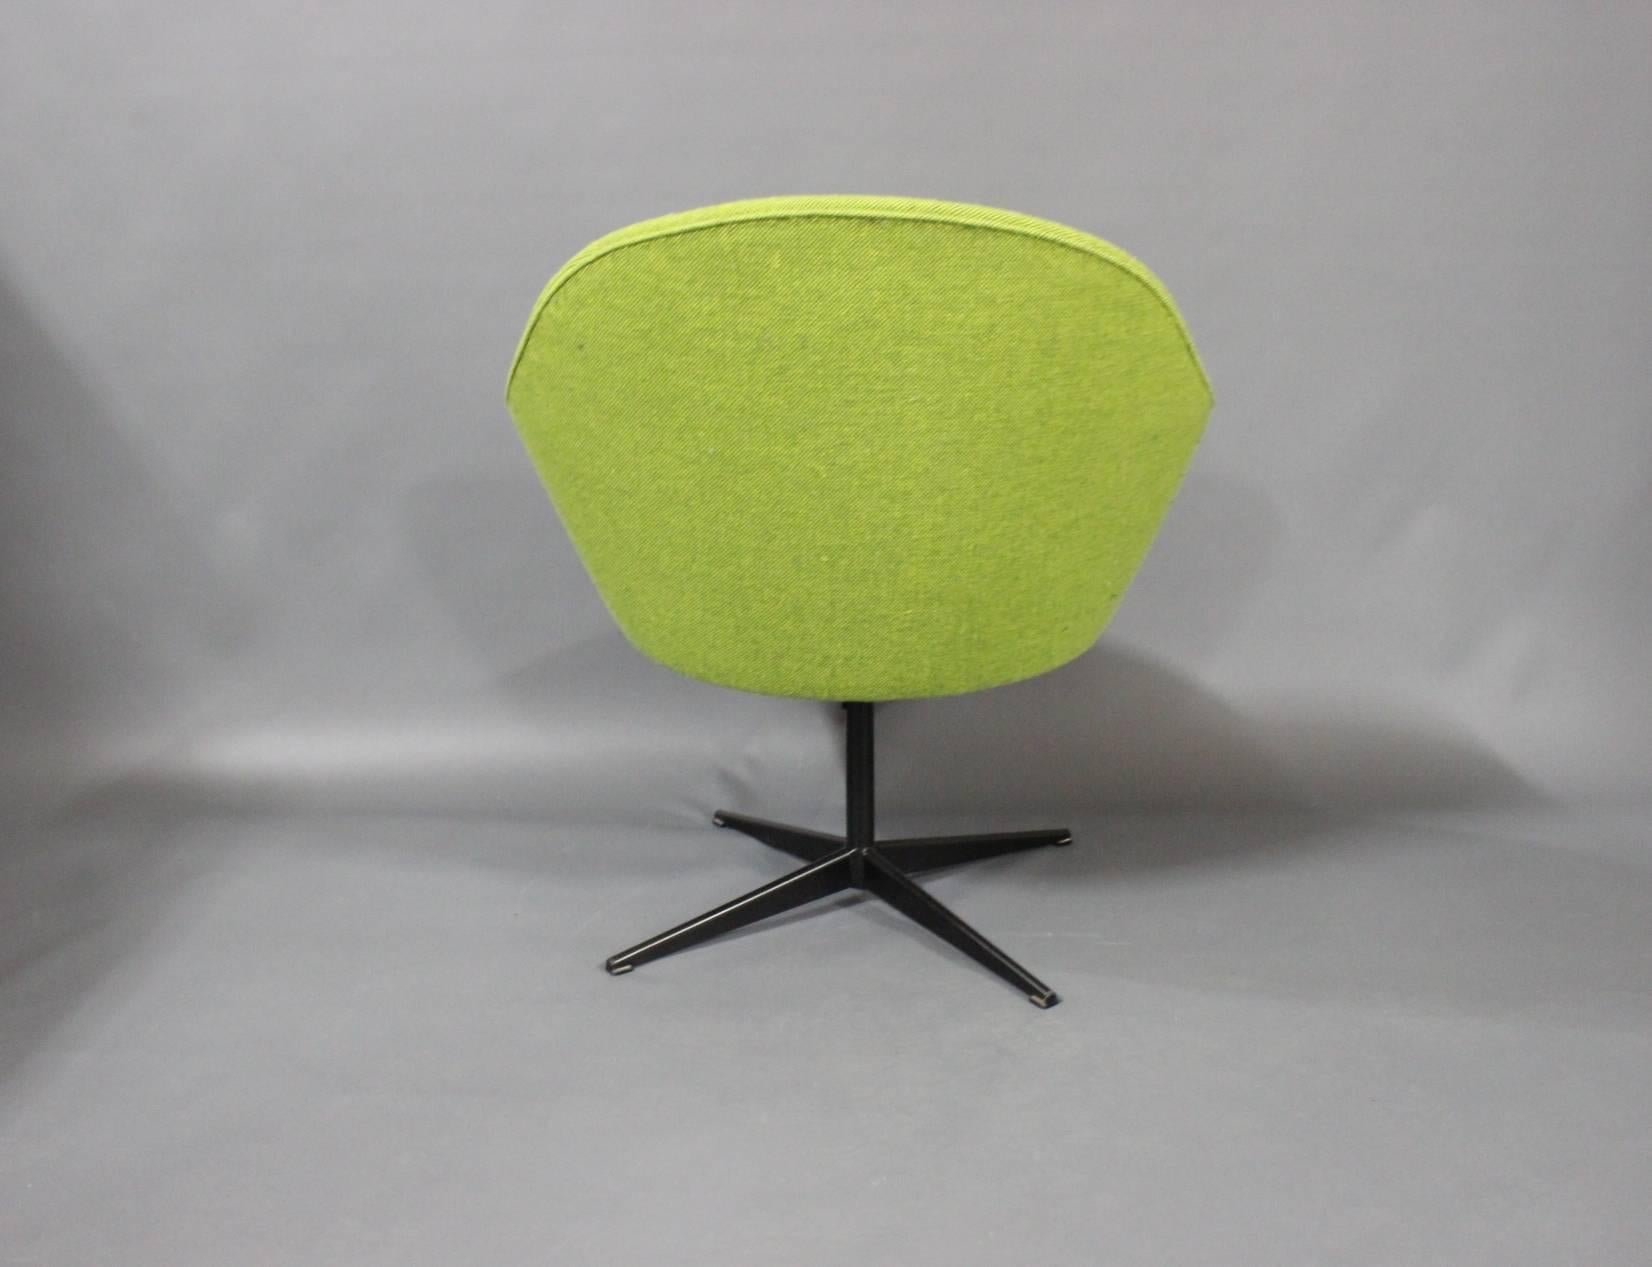 Mid-20th Century Lounge Chair in Green Hallingdal Wool, Danish Design from the 1960s For Sale